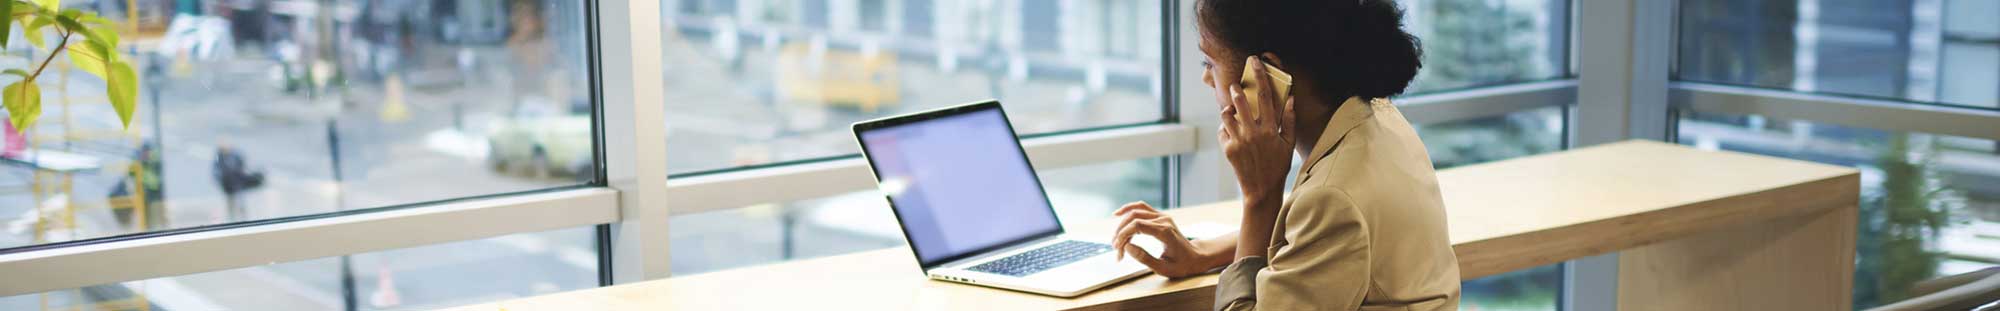 woman using a laptop in a brightly-lit office